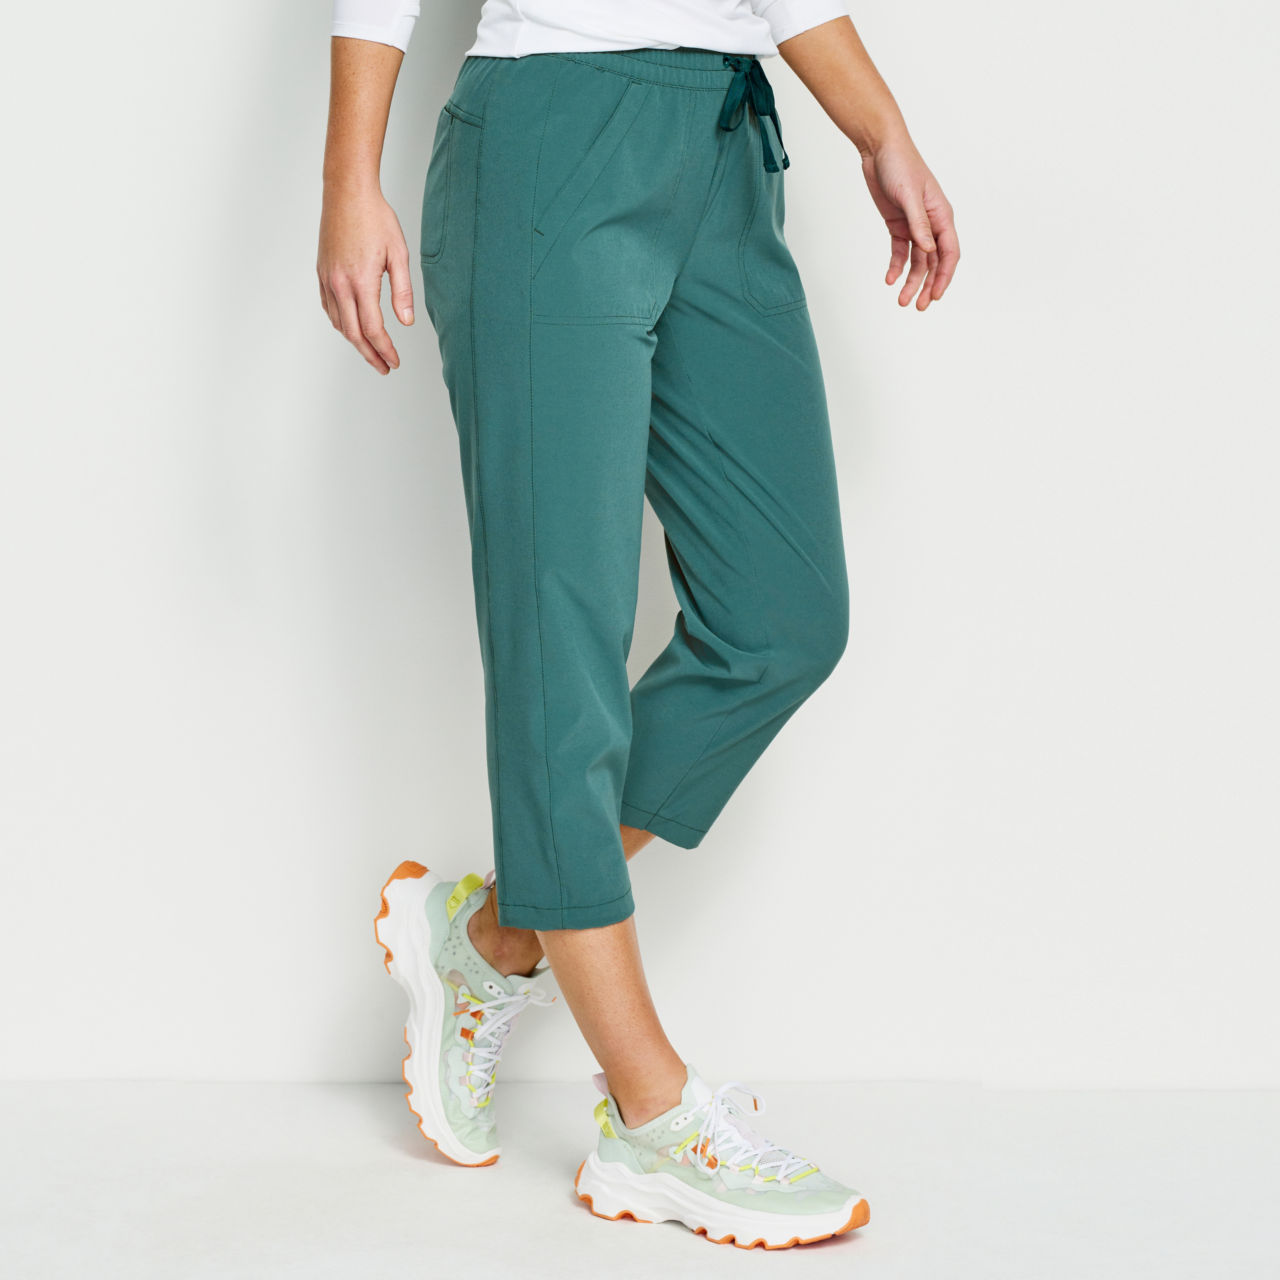 All-Around Relaxed Fit Capri Pants -  image number 1